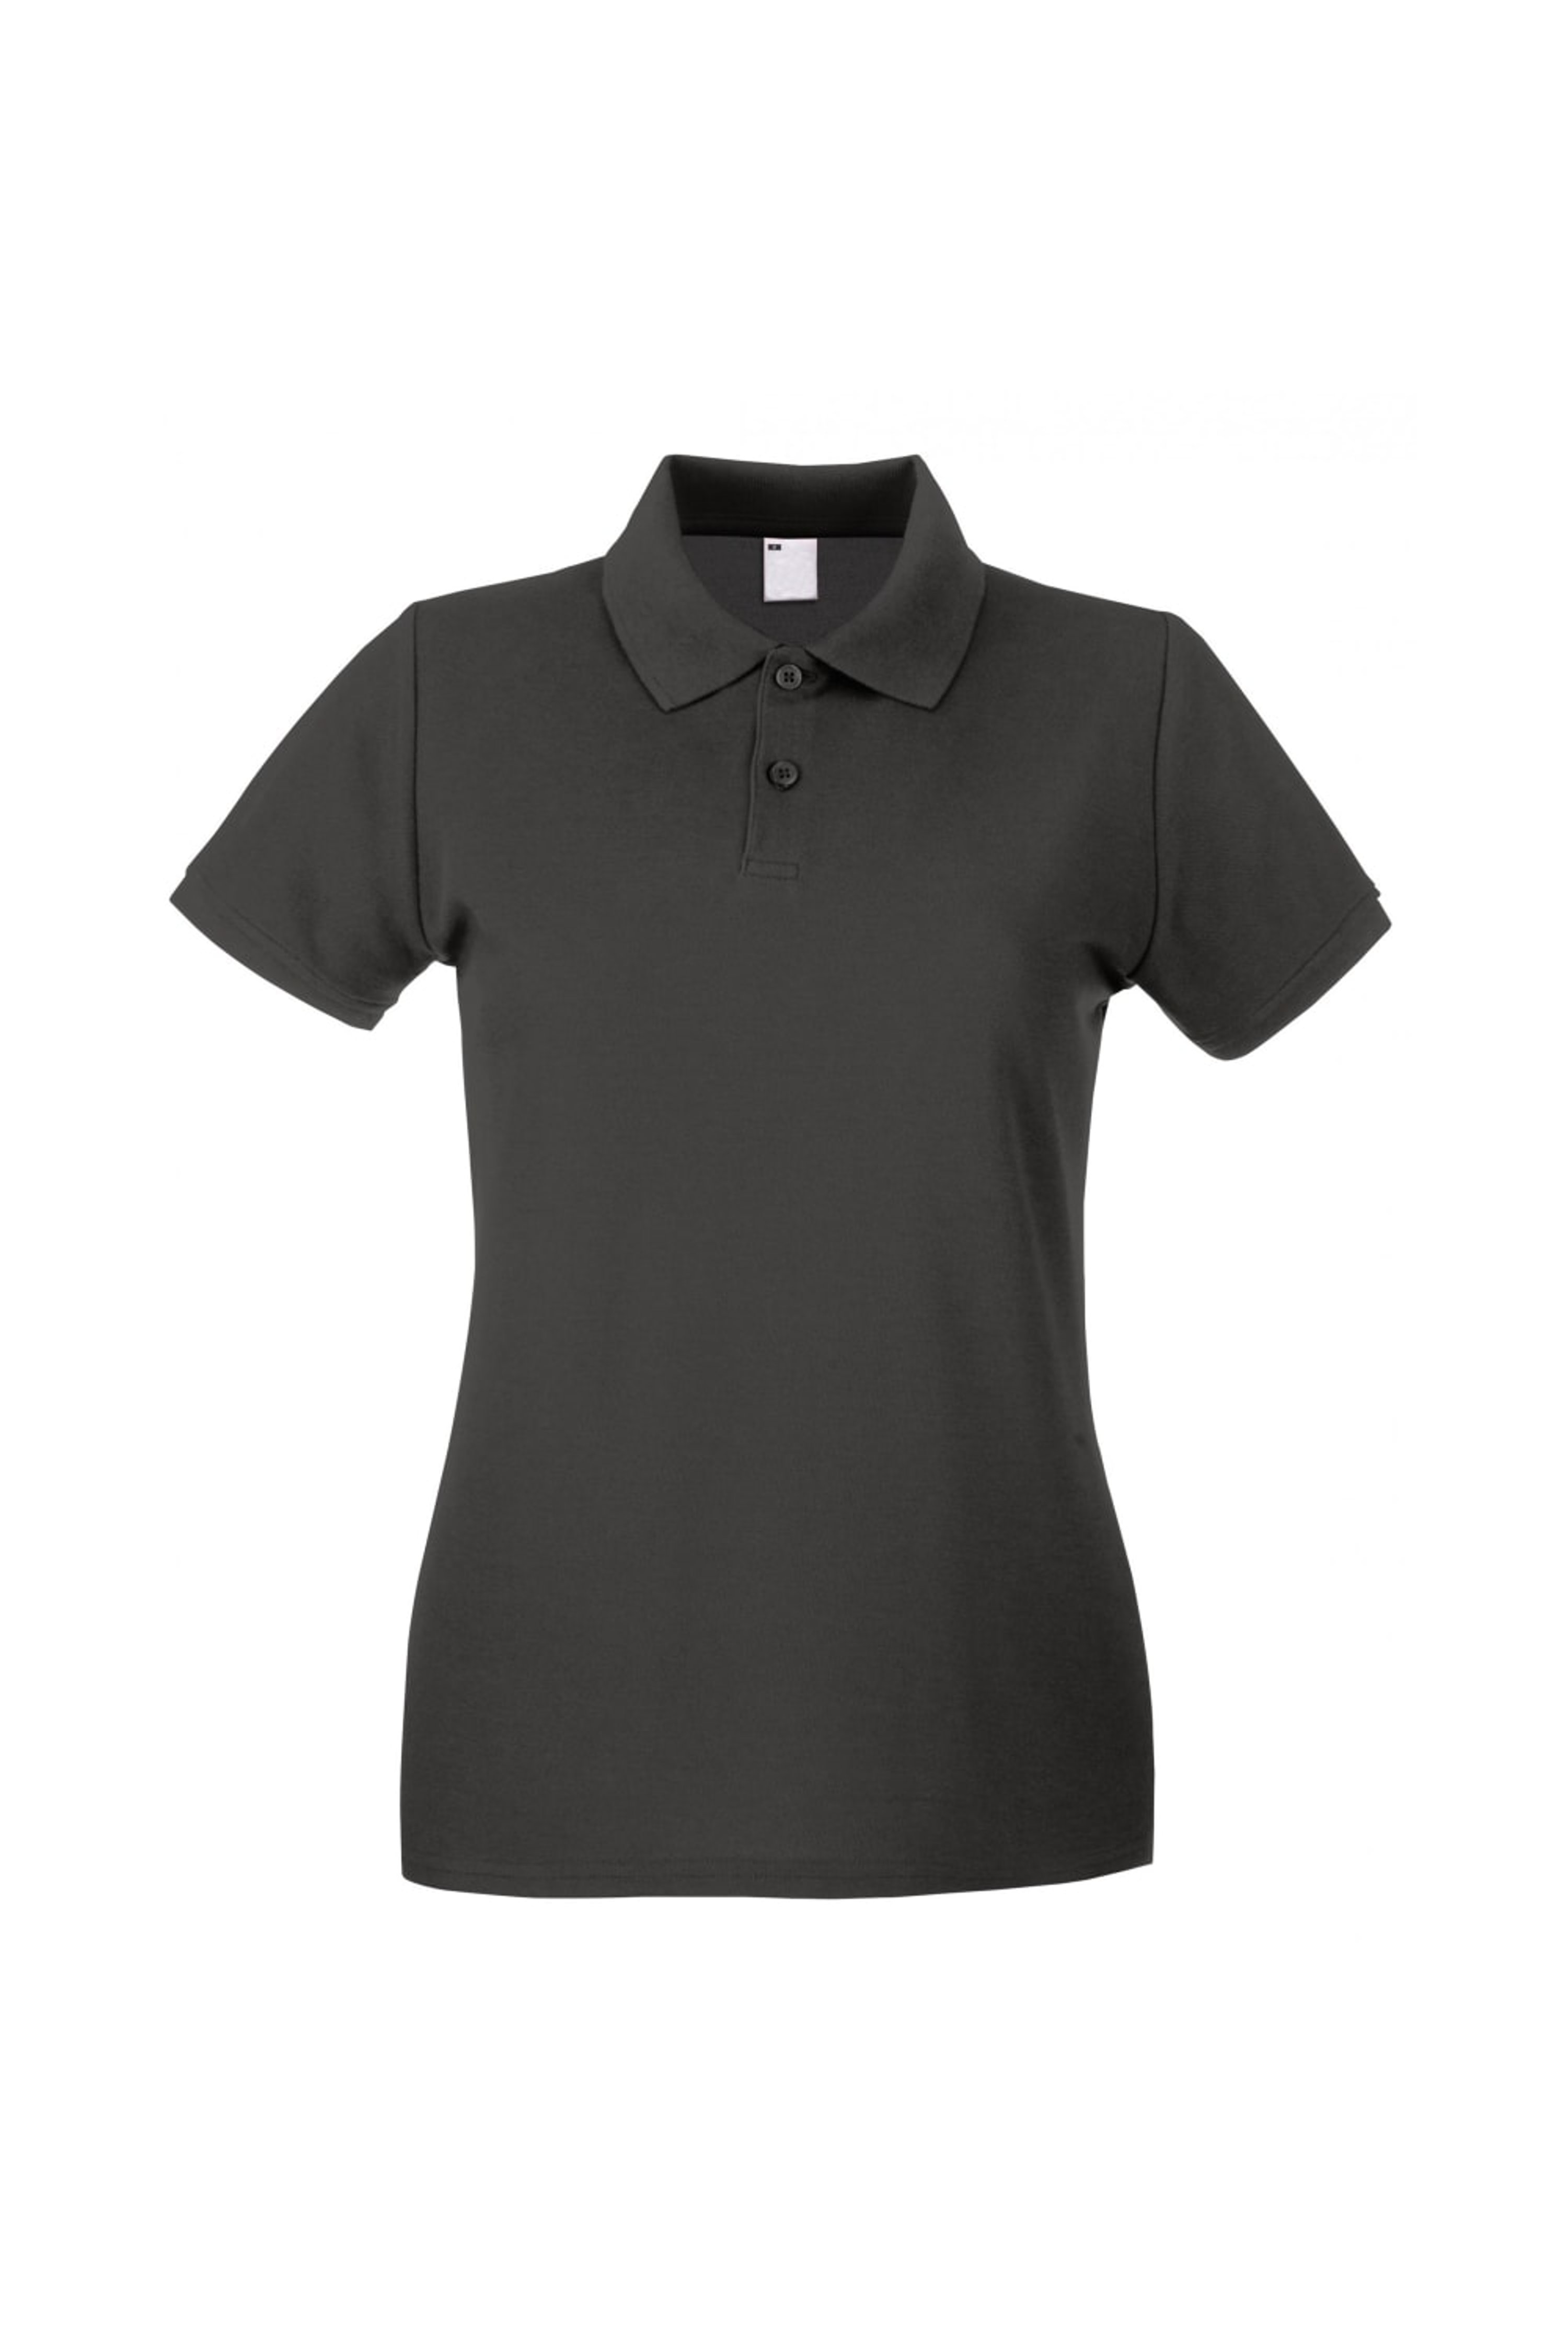 UNIVERSAL TEXTILES UNIVERSAL TEXTILES WOMENS/LADIES FITTED SHORT SLEEVE CASUAL POLO SHIRT (GRAPHITE)